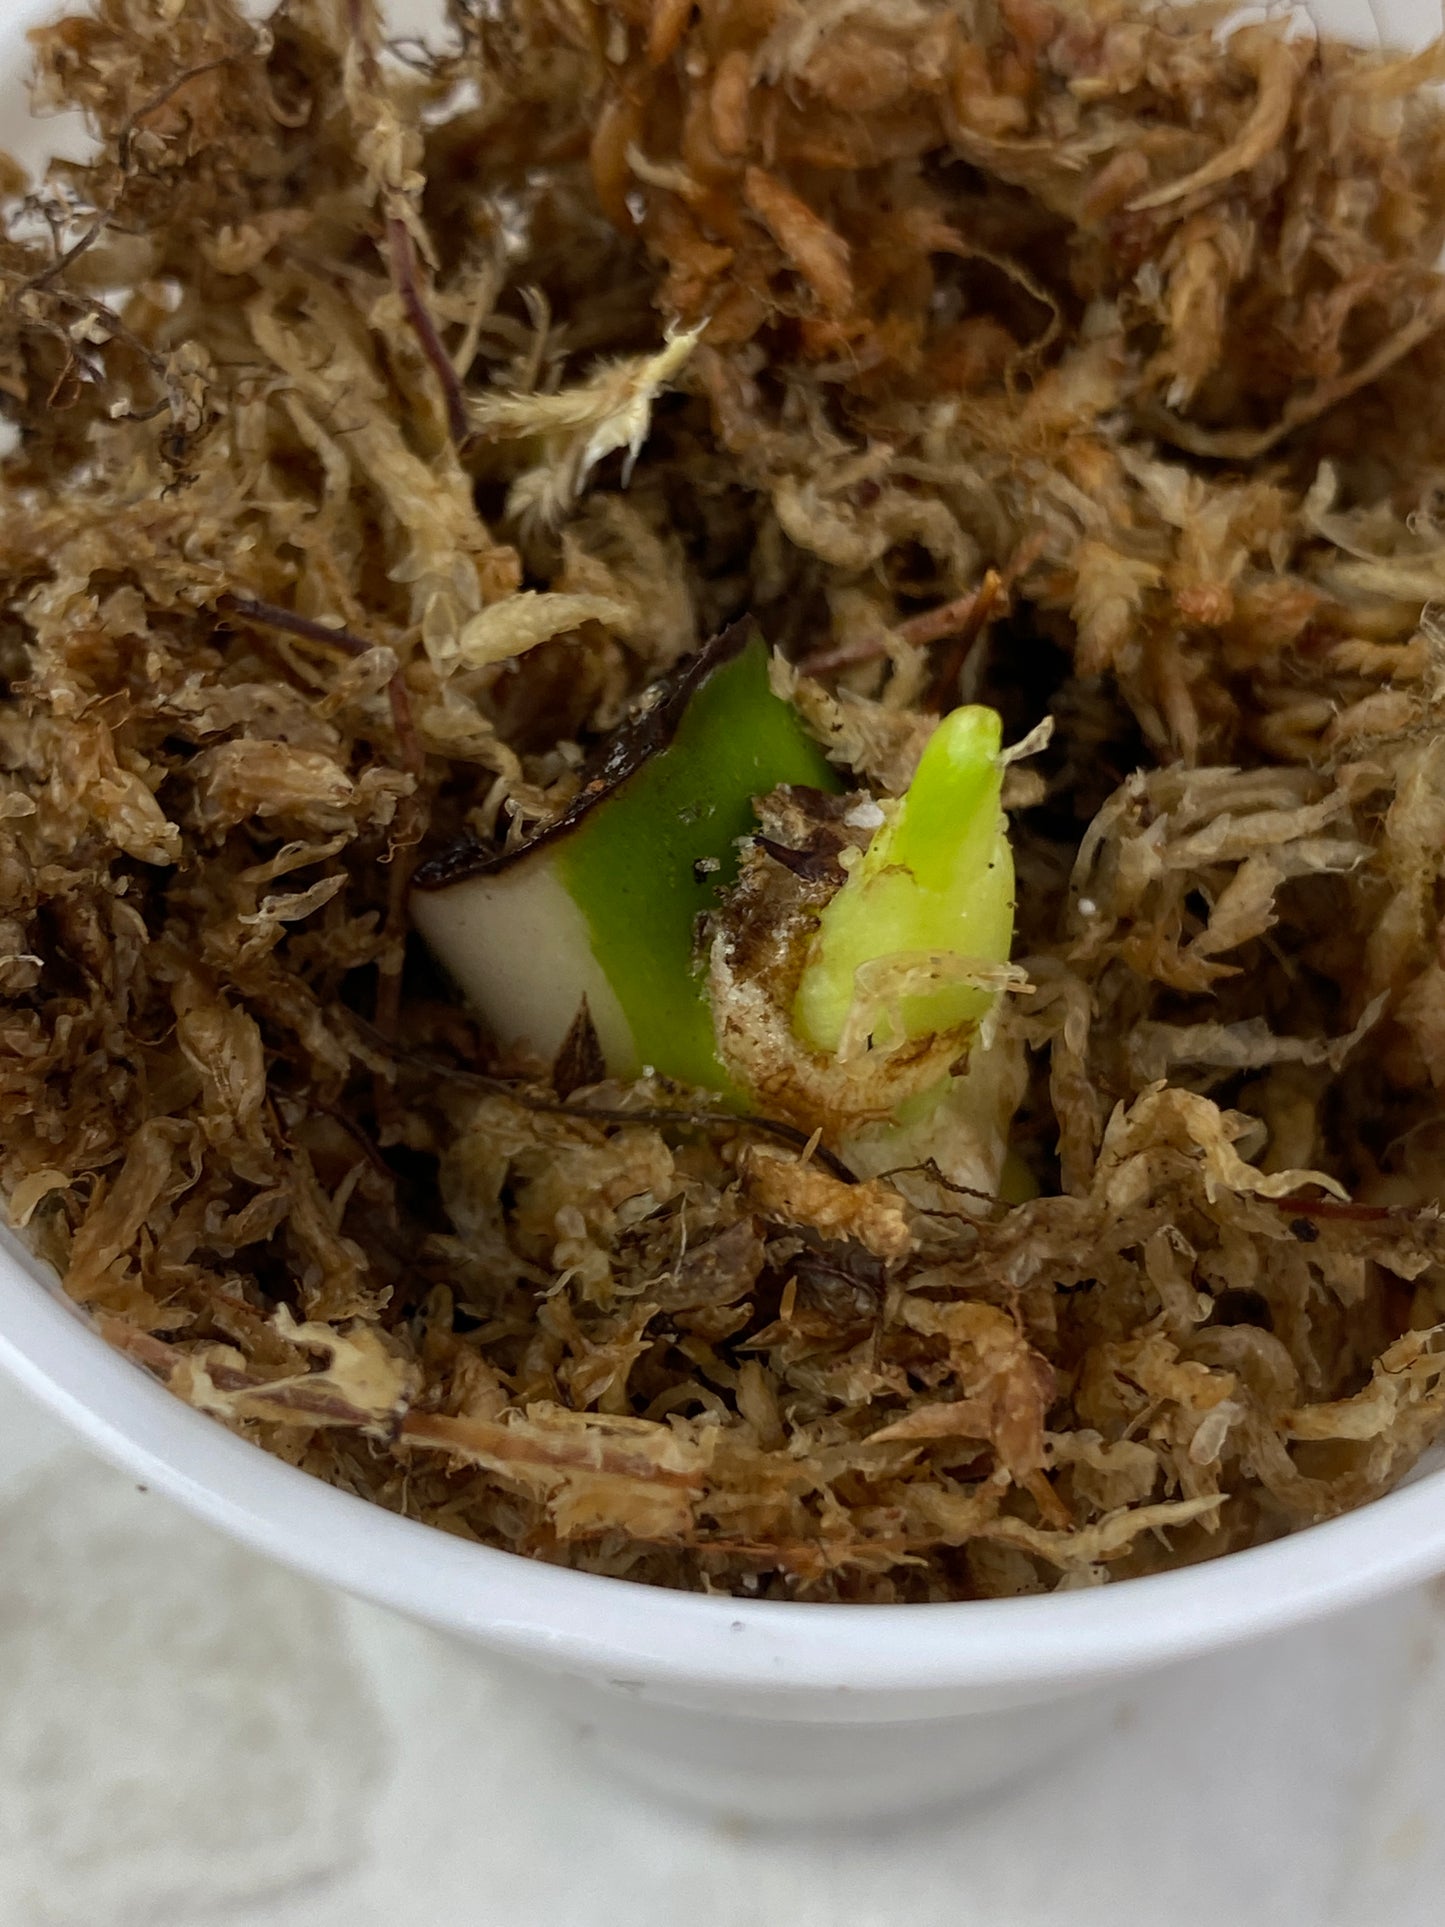 Philodendron white wizard unrooted sprout